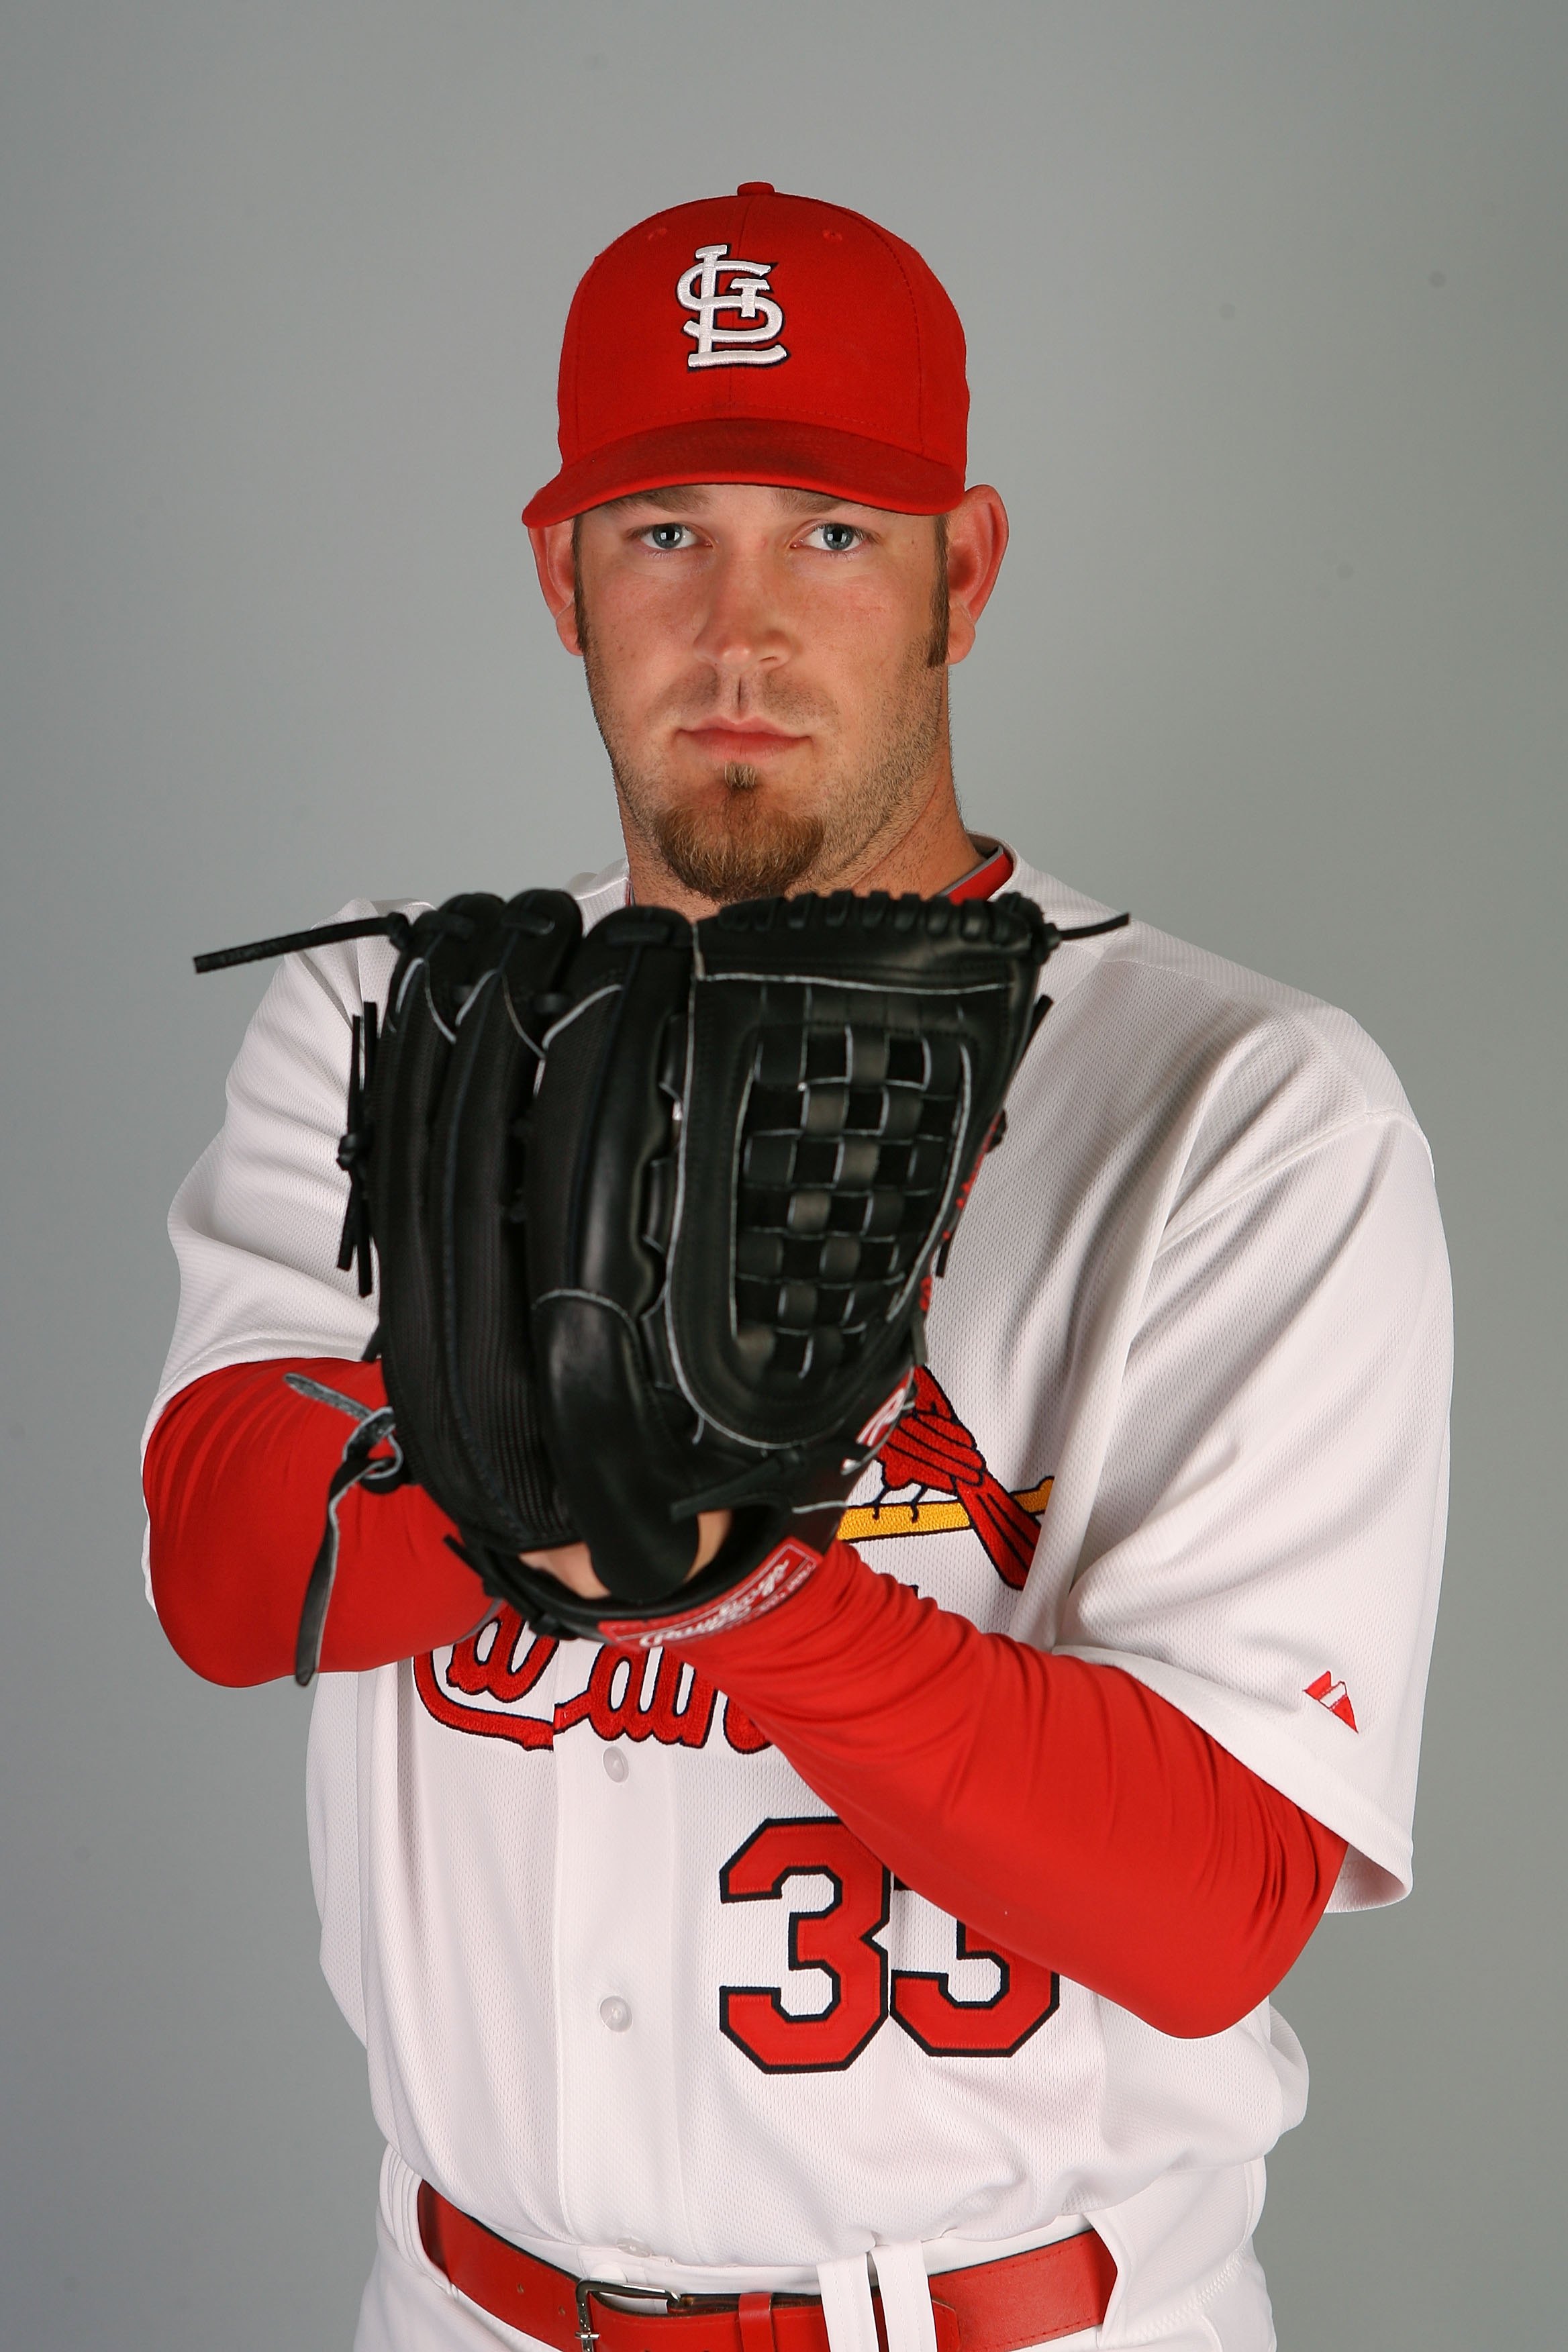 JUPITER, FL - MARCH 01:  Pitcher Brad Penny #33 of the St. Louis Cardinals during photo day at Roger Dean Stadium on March 1, 2010 in Jupiter, Florida.  (Photo by Doug Benc/Getty Images)